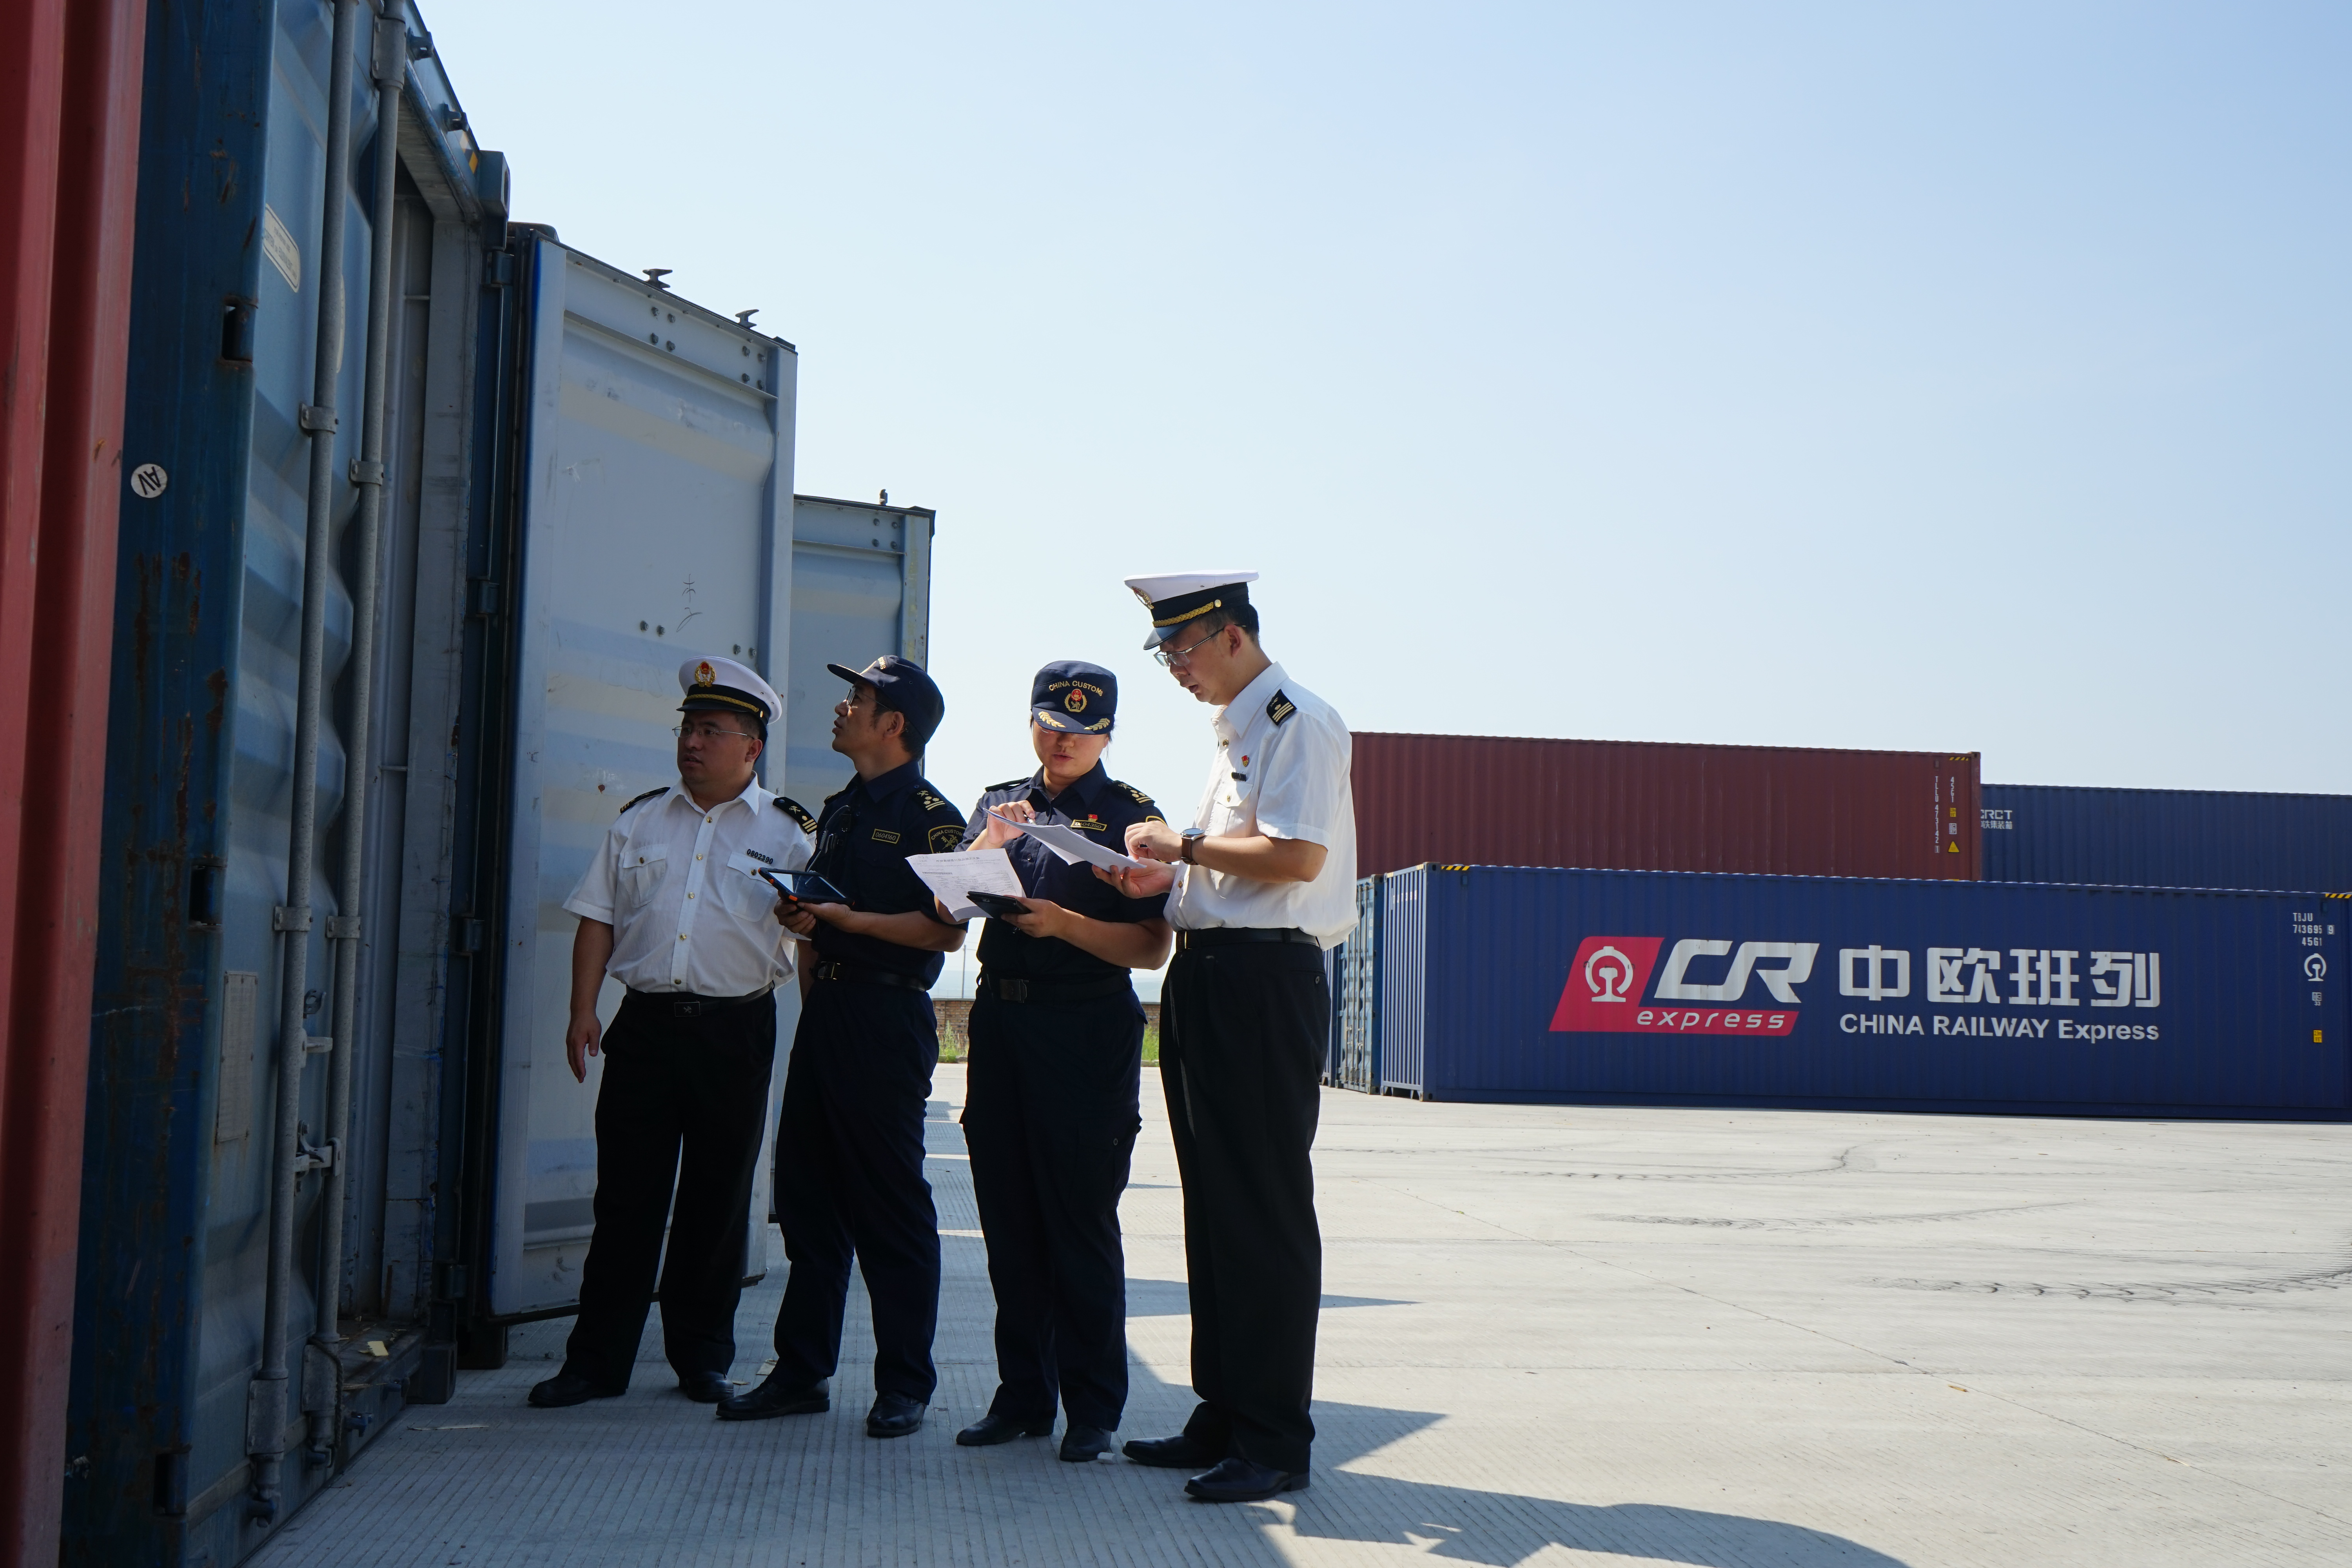 Customs clearance and inspection